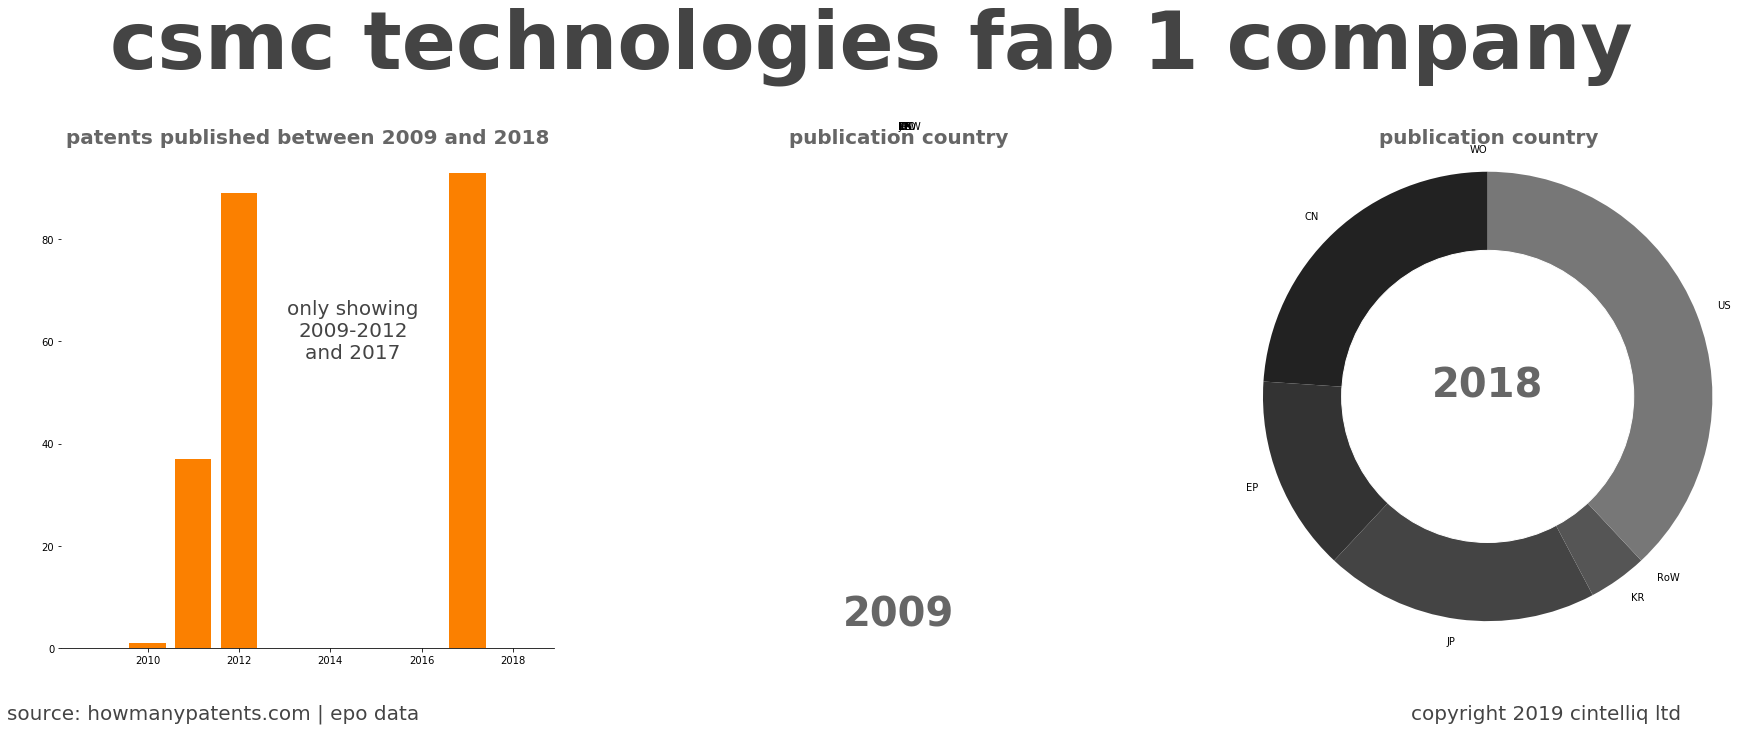 summary of patents for Csmc Technologies Fab 1 Company